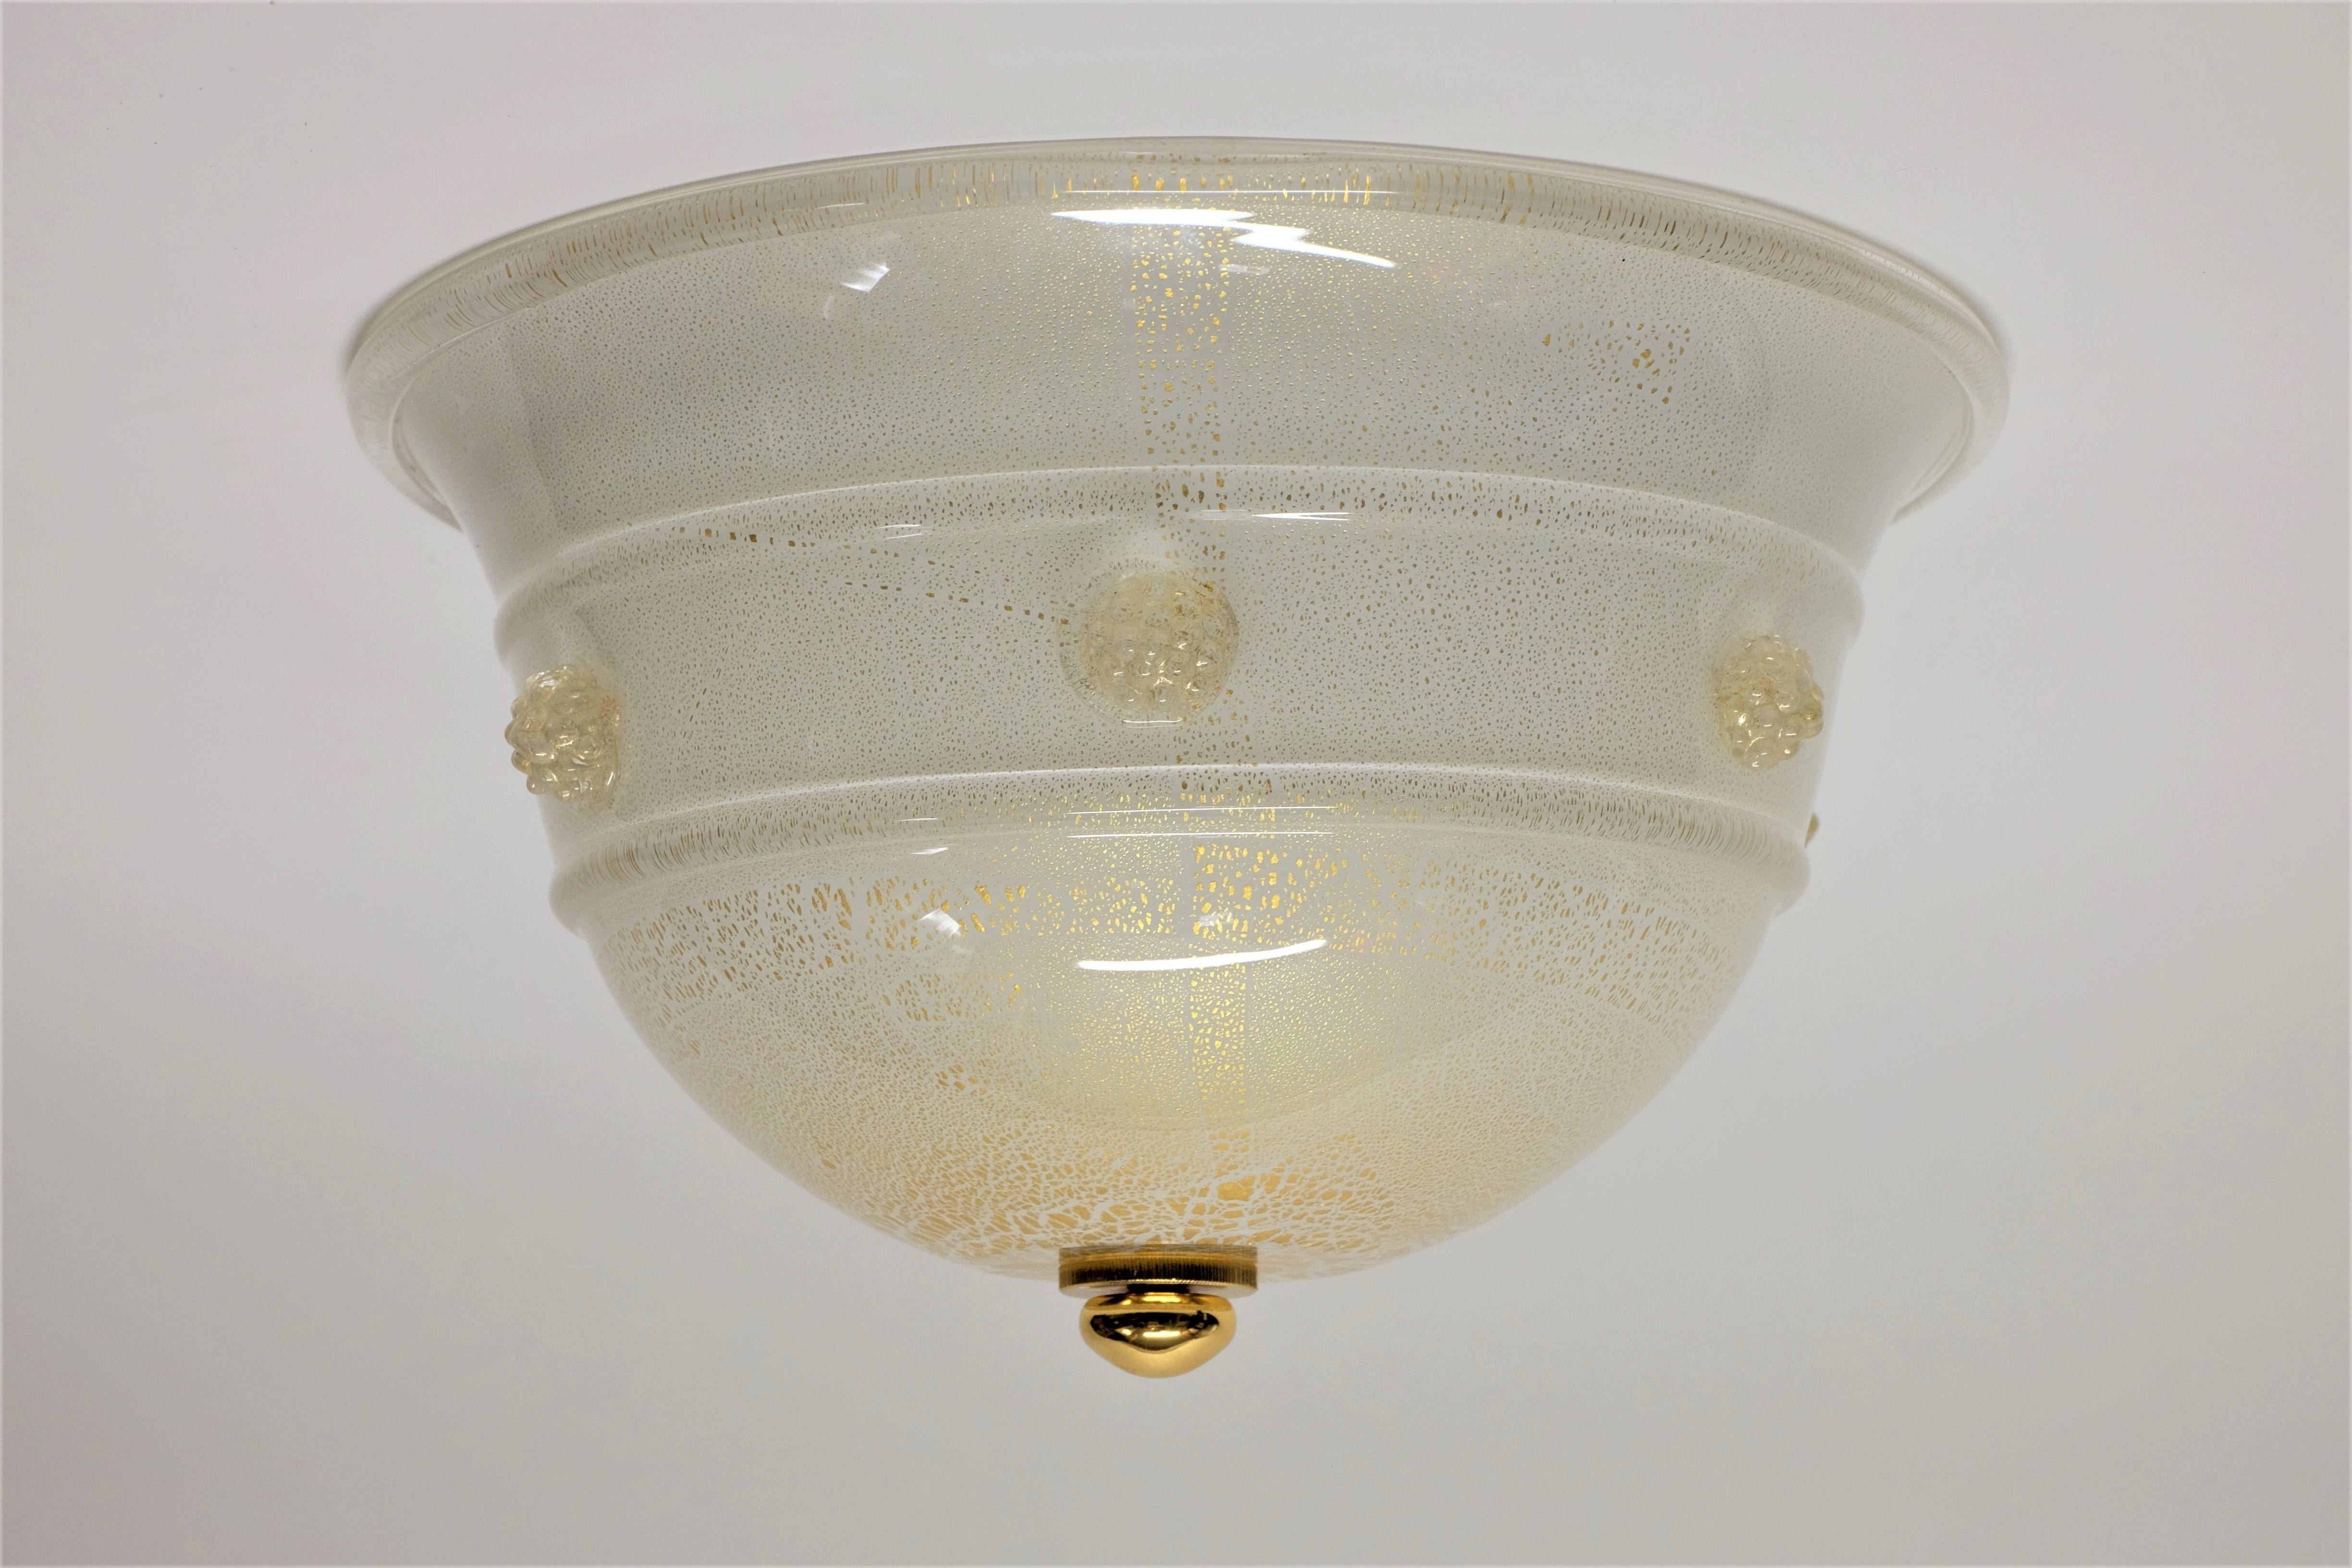 Flush mount ceiling light by Barovier & Toso. Thick opaque glass covered by clear glass with fine scattering of gold flecks. Glass details and florets are in clear and gold. Metal mounting plate in white paint uses 2 bulbs (E14).

The lamp is in a